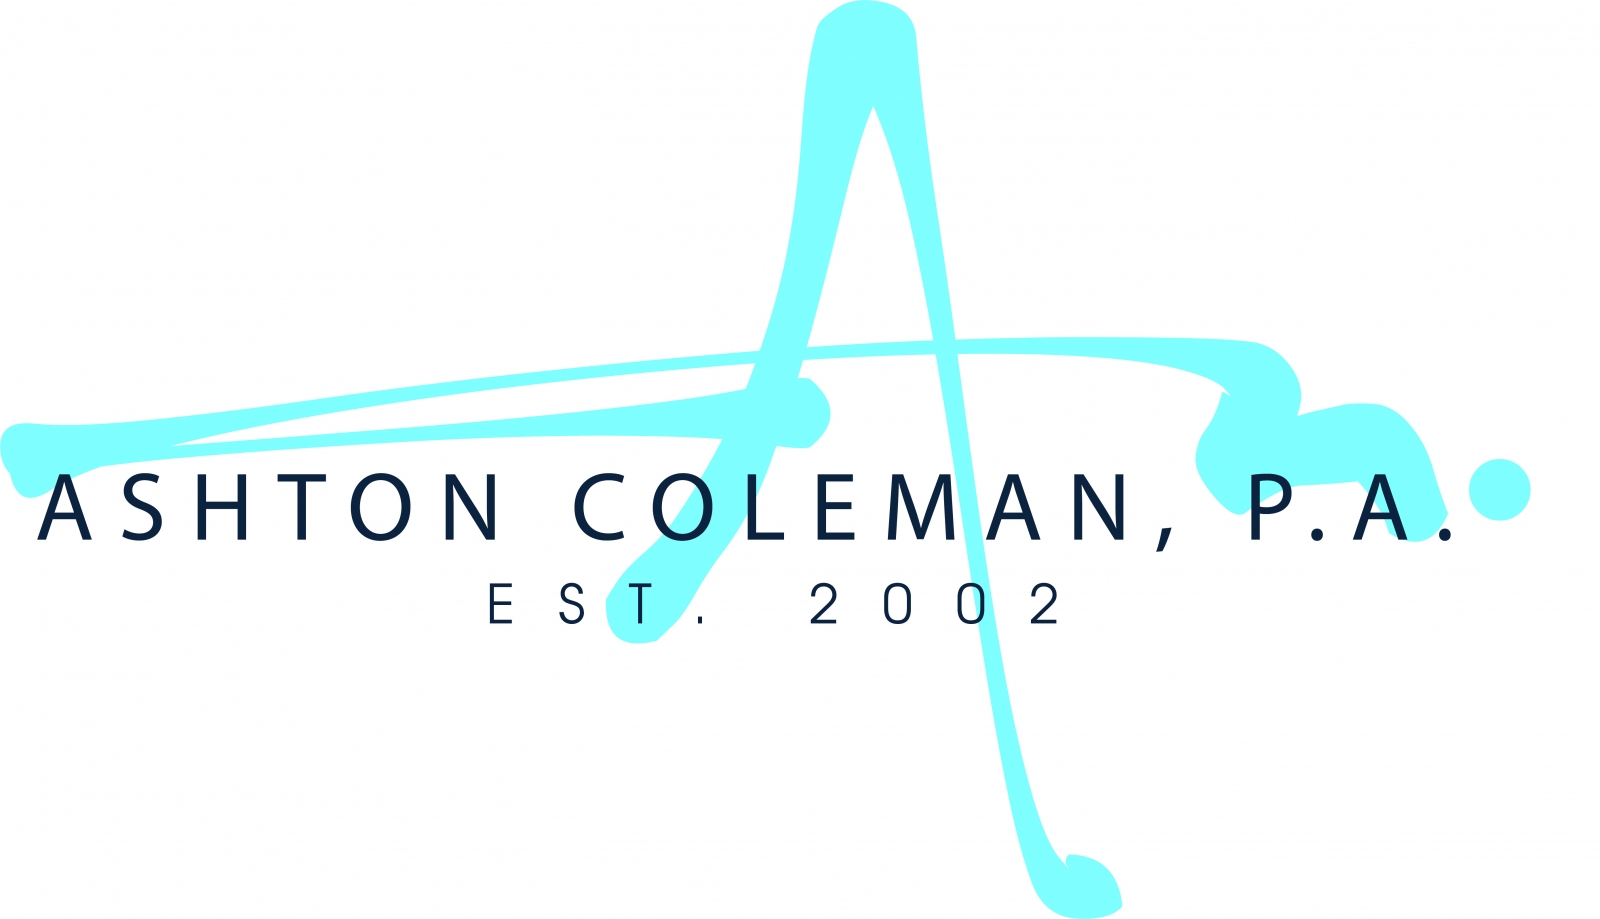 Ashton Coleman, P.A. ONE Sotheby's International Realty